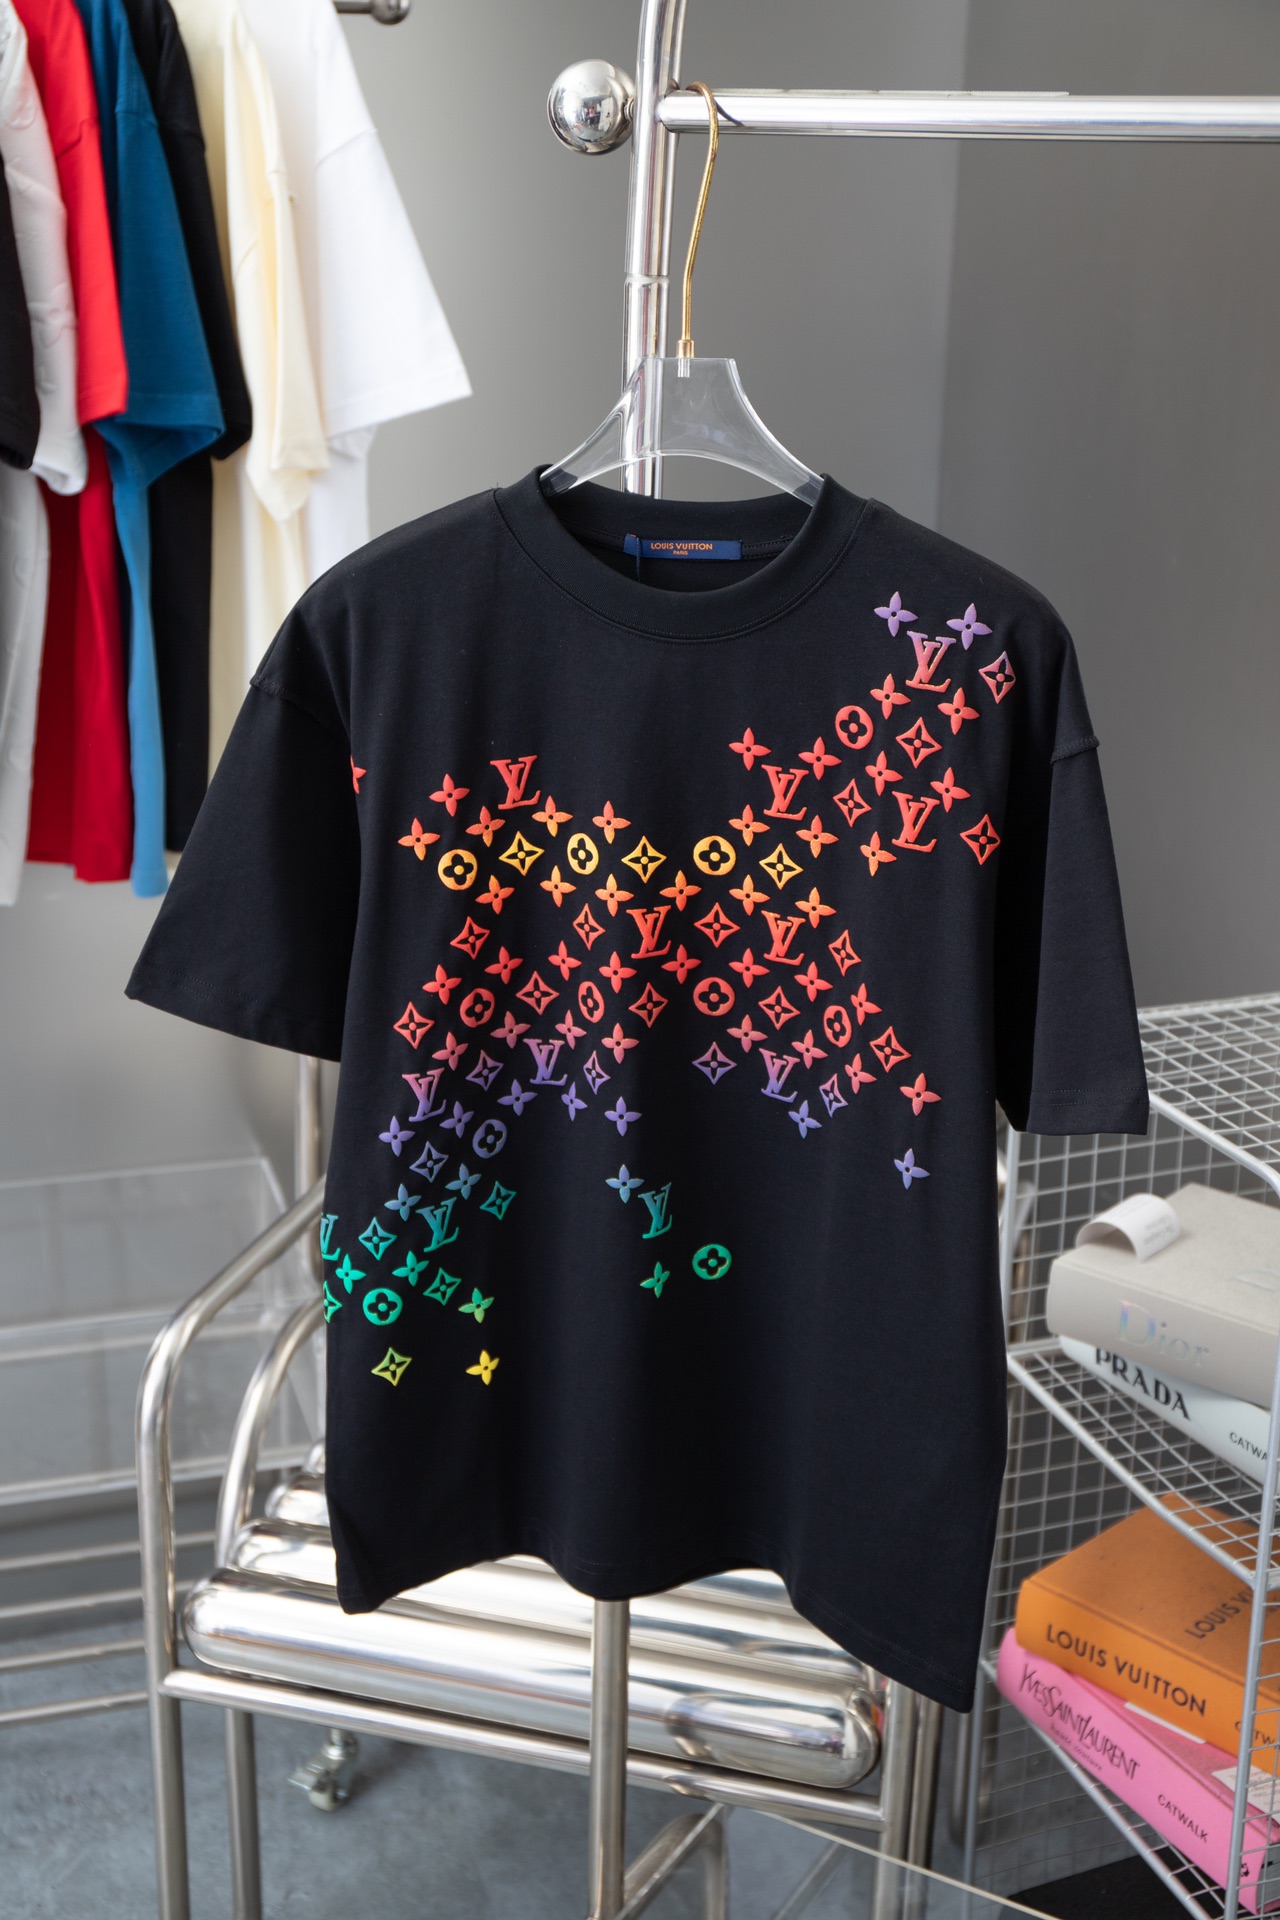 Louis Vuitton Clothing T-Shirt Unisex Cotton Knitting Spring Collection Fashion Short Sleeve